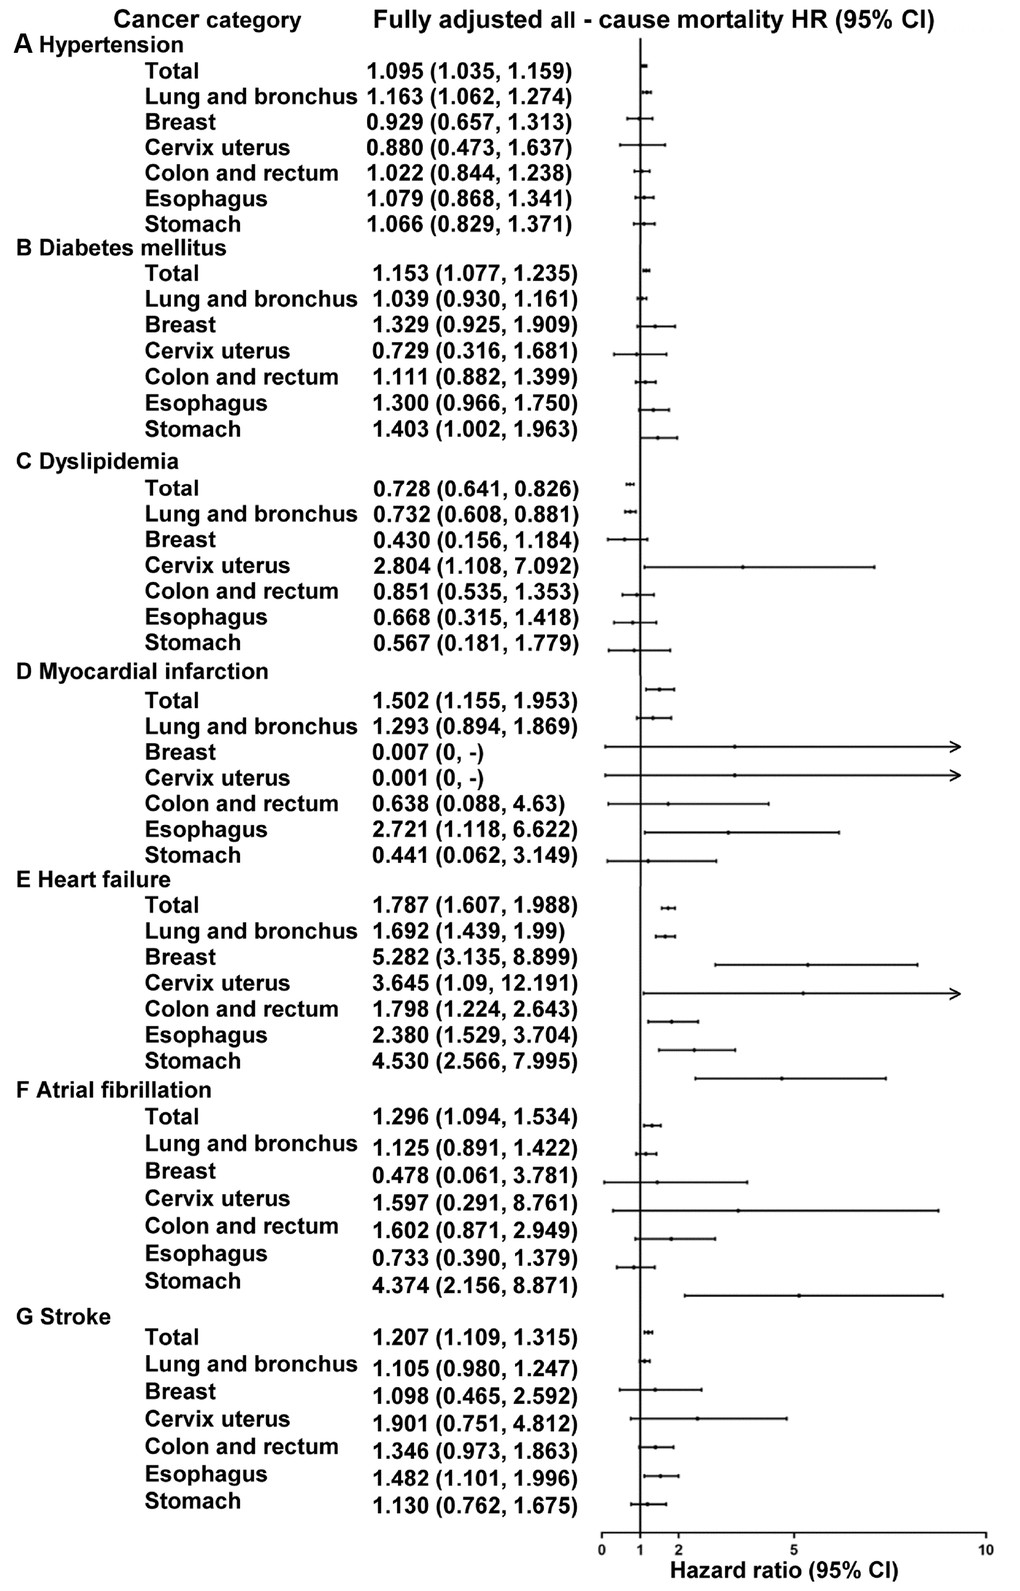 Hazard ratios for all-cause mortality in top six cancer types patients with and without specific cardiovascular comorbidities. The impact of the specific CVRF or CVD on mortality for the general cancer patients, lung and bronchus, breast, cervix uterus, colon and rectum, esophagus and stomach cancer patients. Hazard ratios from Cox regression analysis were adjusted for age, gender, treatment, tumor stage and cardiovascular comorbidities.